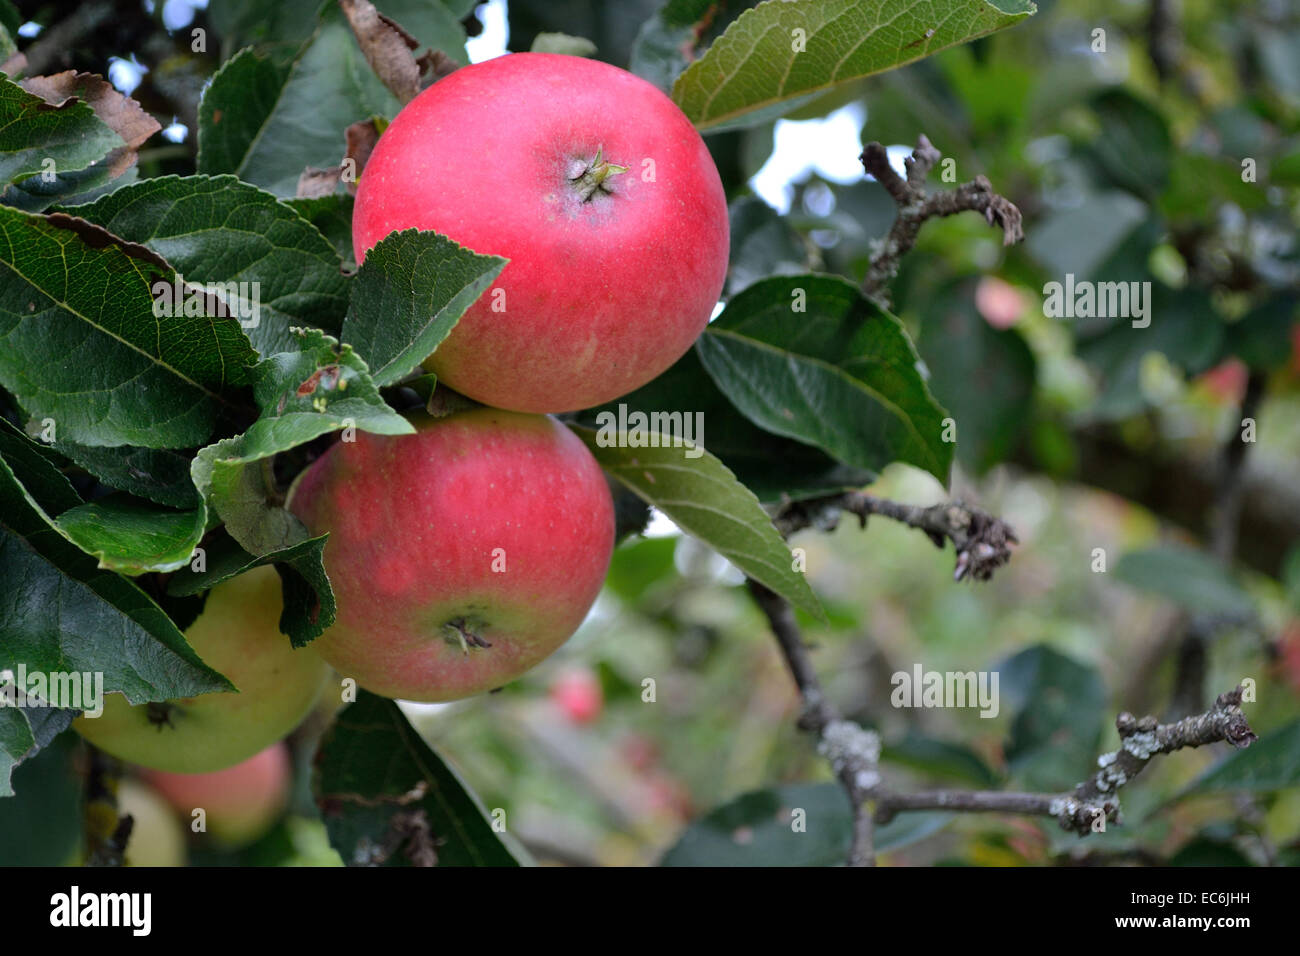 Close-up of untreated apples on the tree Stock Photo